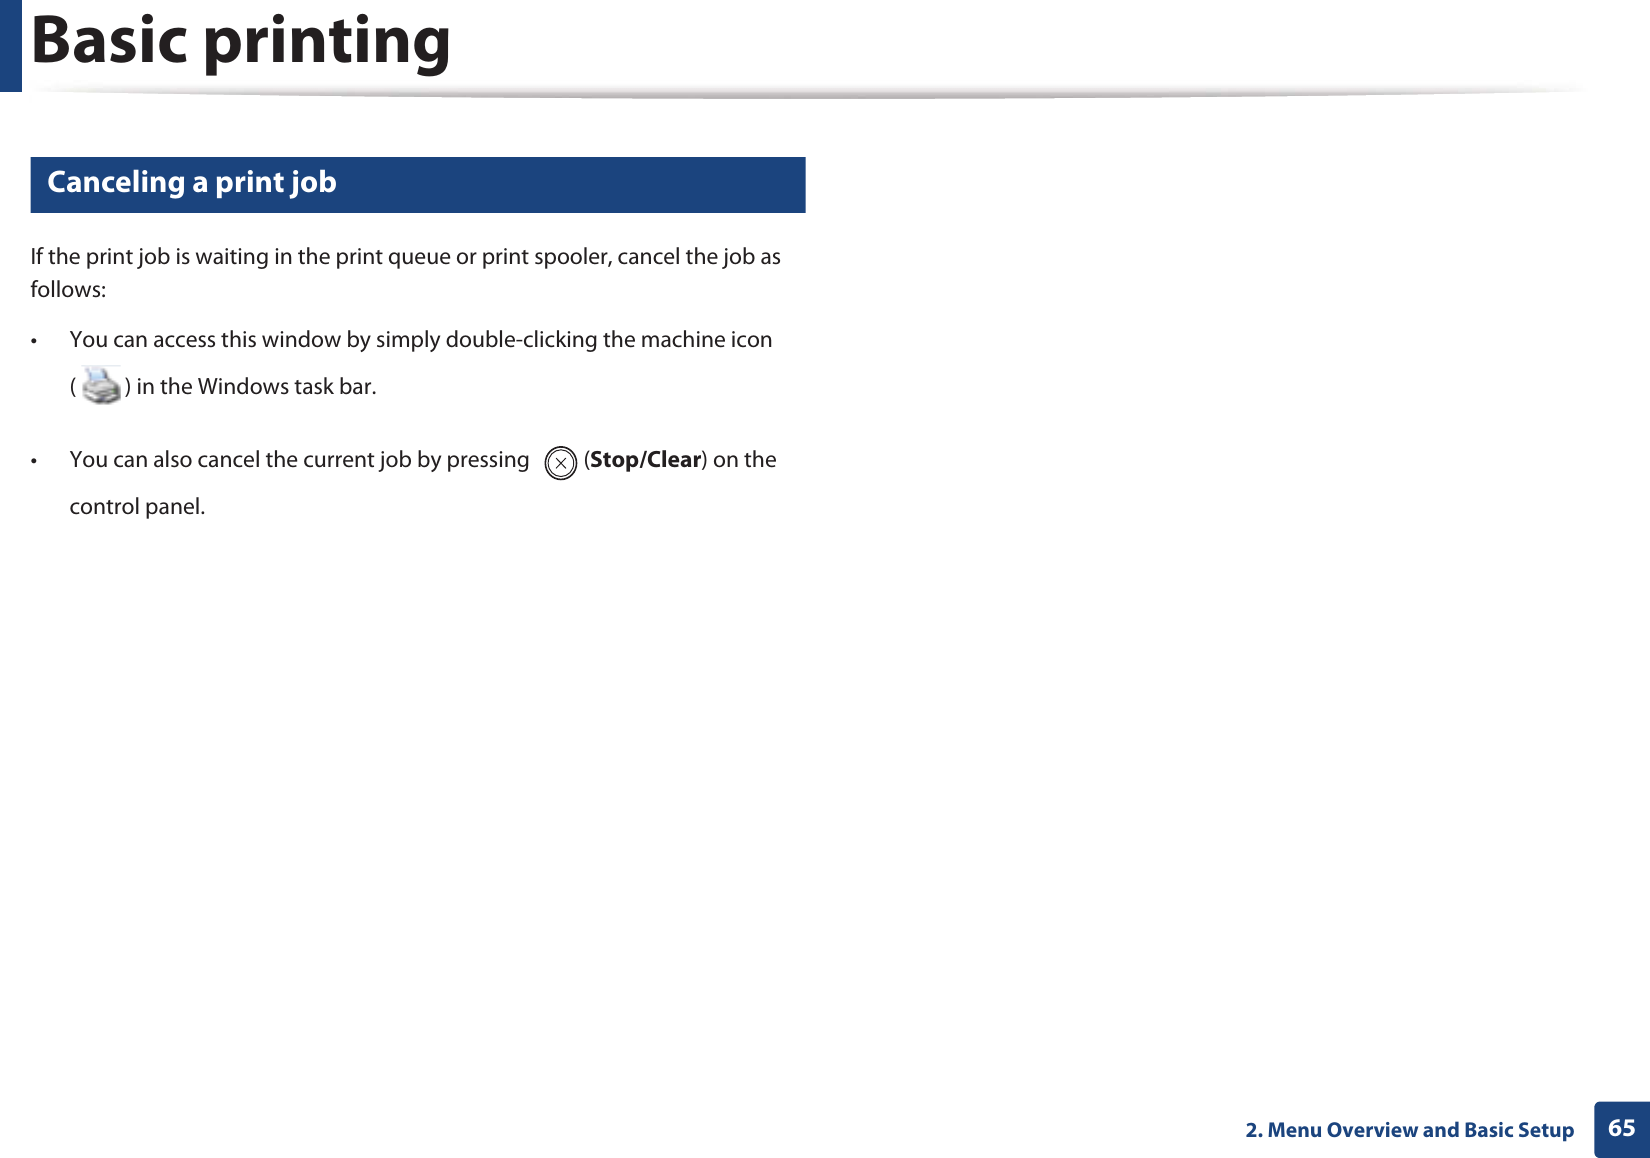 Basic printing652. Menu Overview and Basic Setup11 Canceling a print jobIf the print job is waiting in the print queue or print spooler, cancel the job as follows:• You can access this window by simply double-clicking the machine icon ( ) in the Windows task bar. • You can also cancel the current job by pressing  (Stop/Clear) on the control panel.